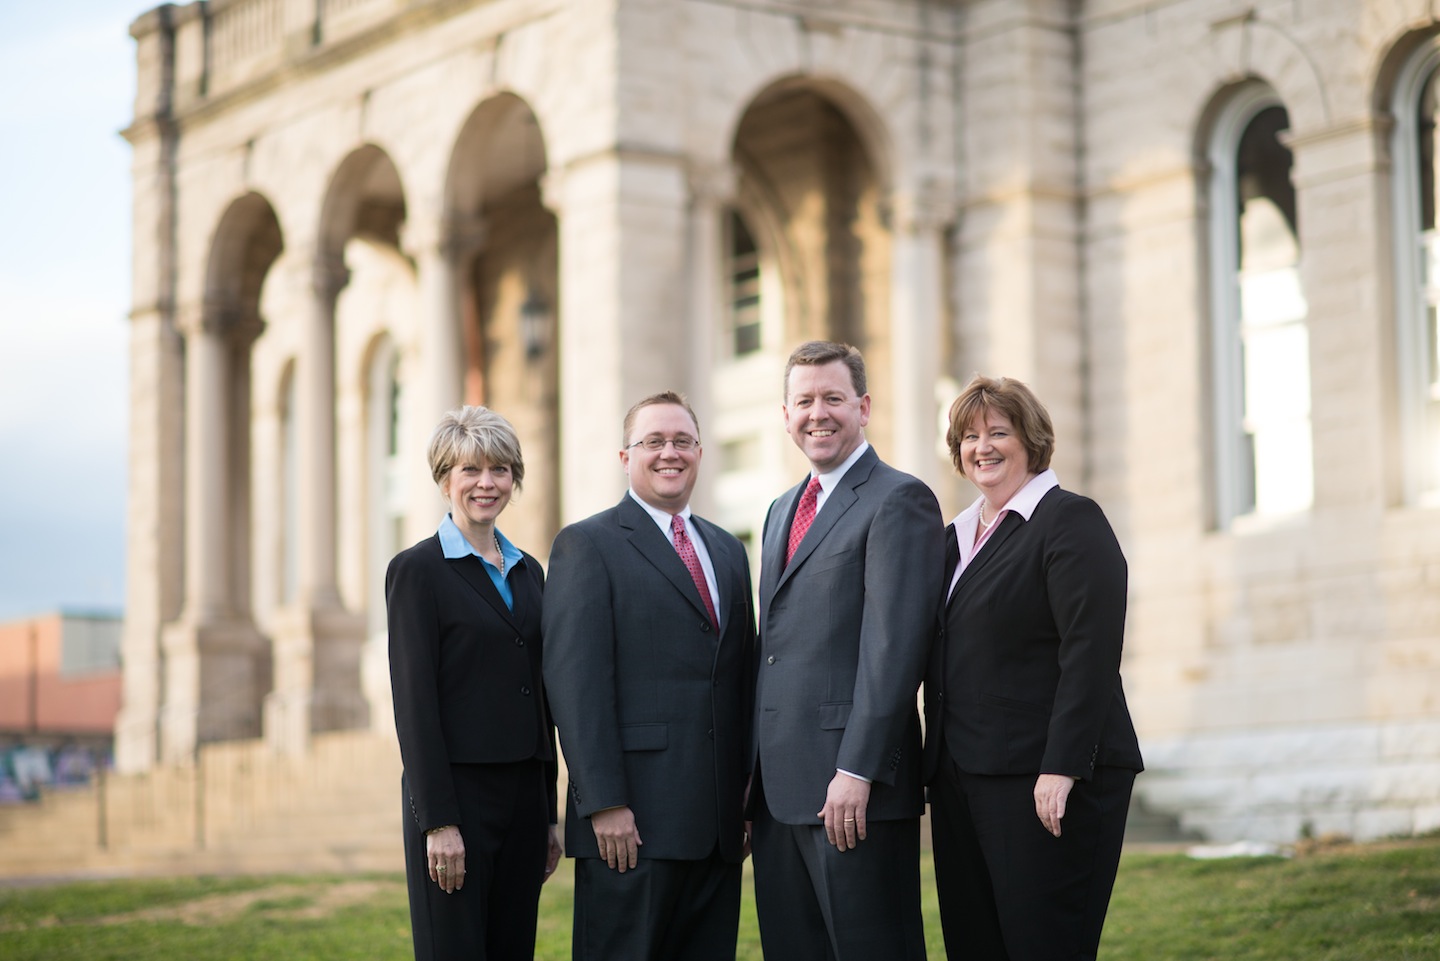 The Four Licensed Agents: Jenny Burden, Brant Suter, Chris Rooker, Cathi Beighe